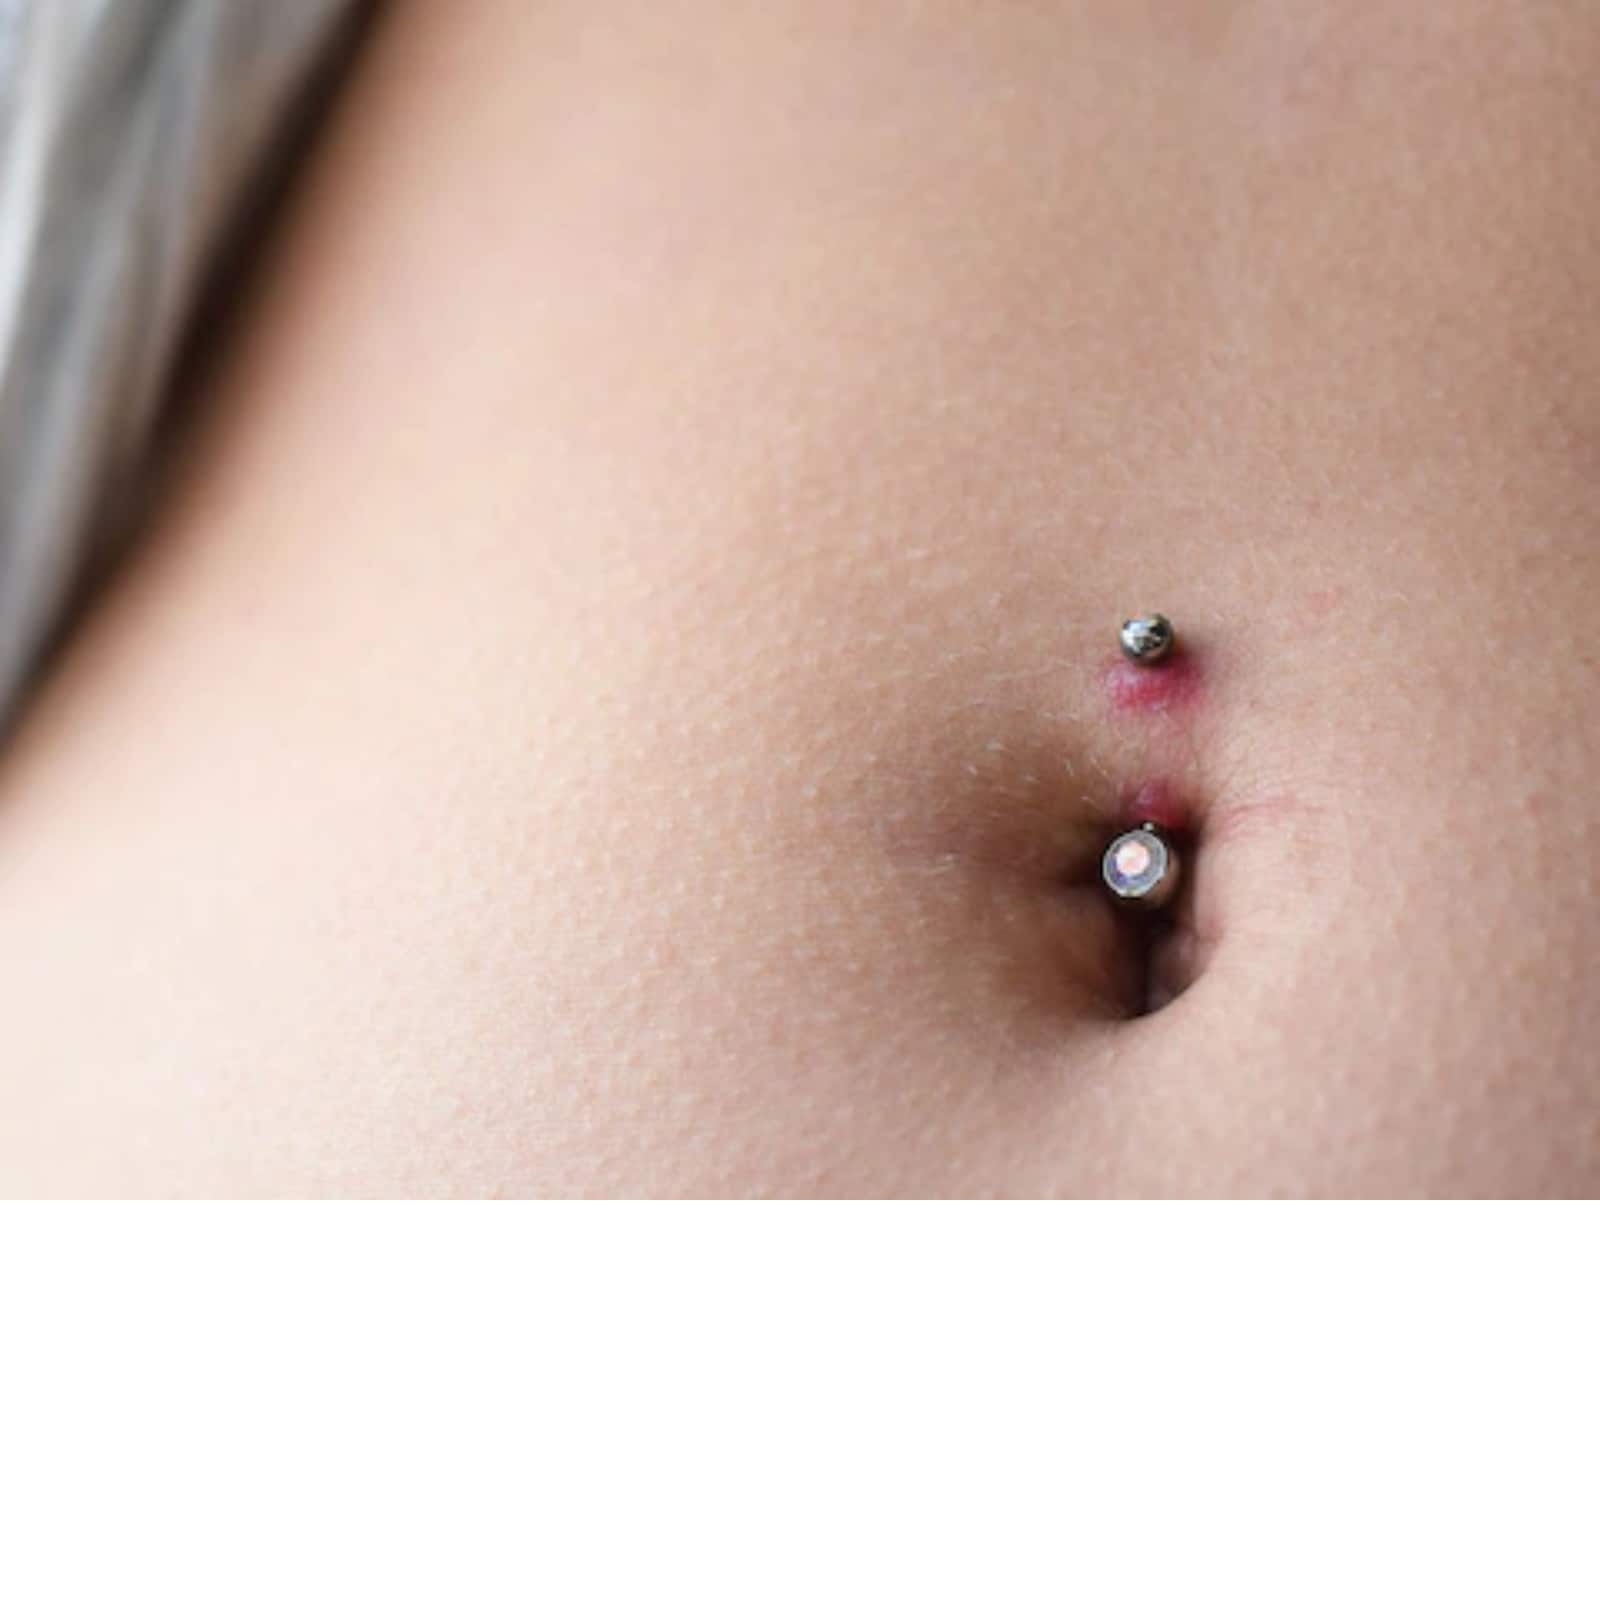 Causes Belly Button Infection? to Cure it